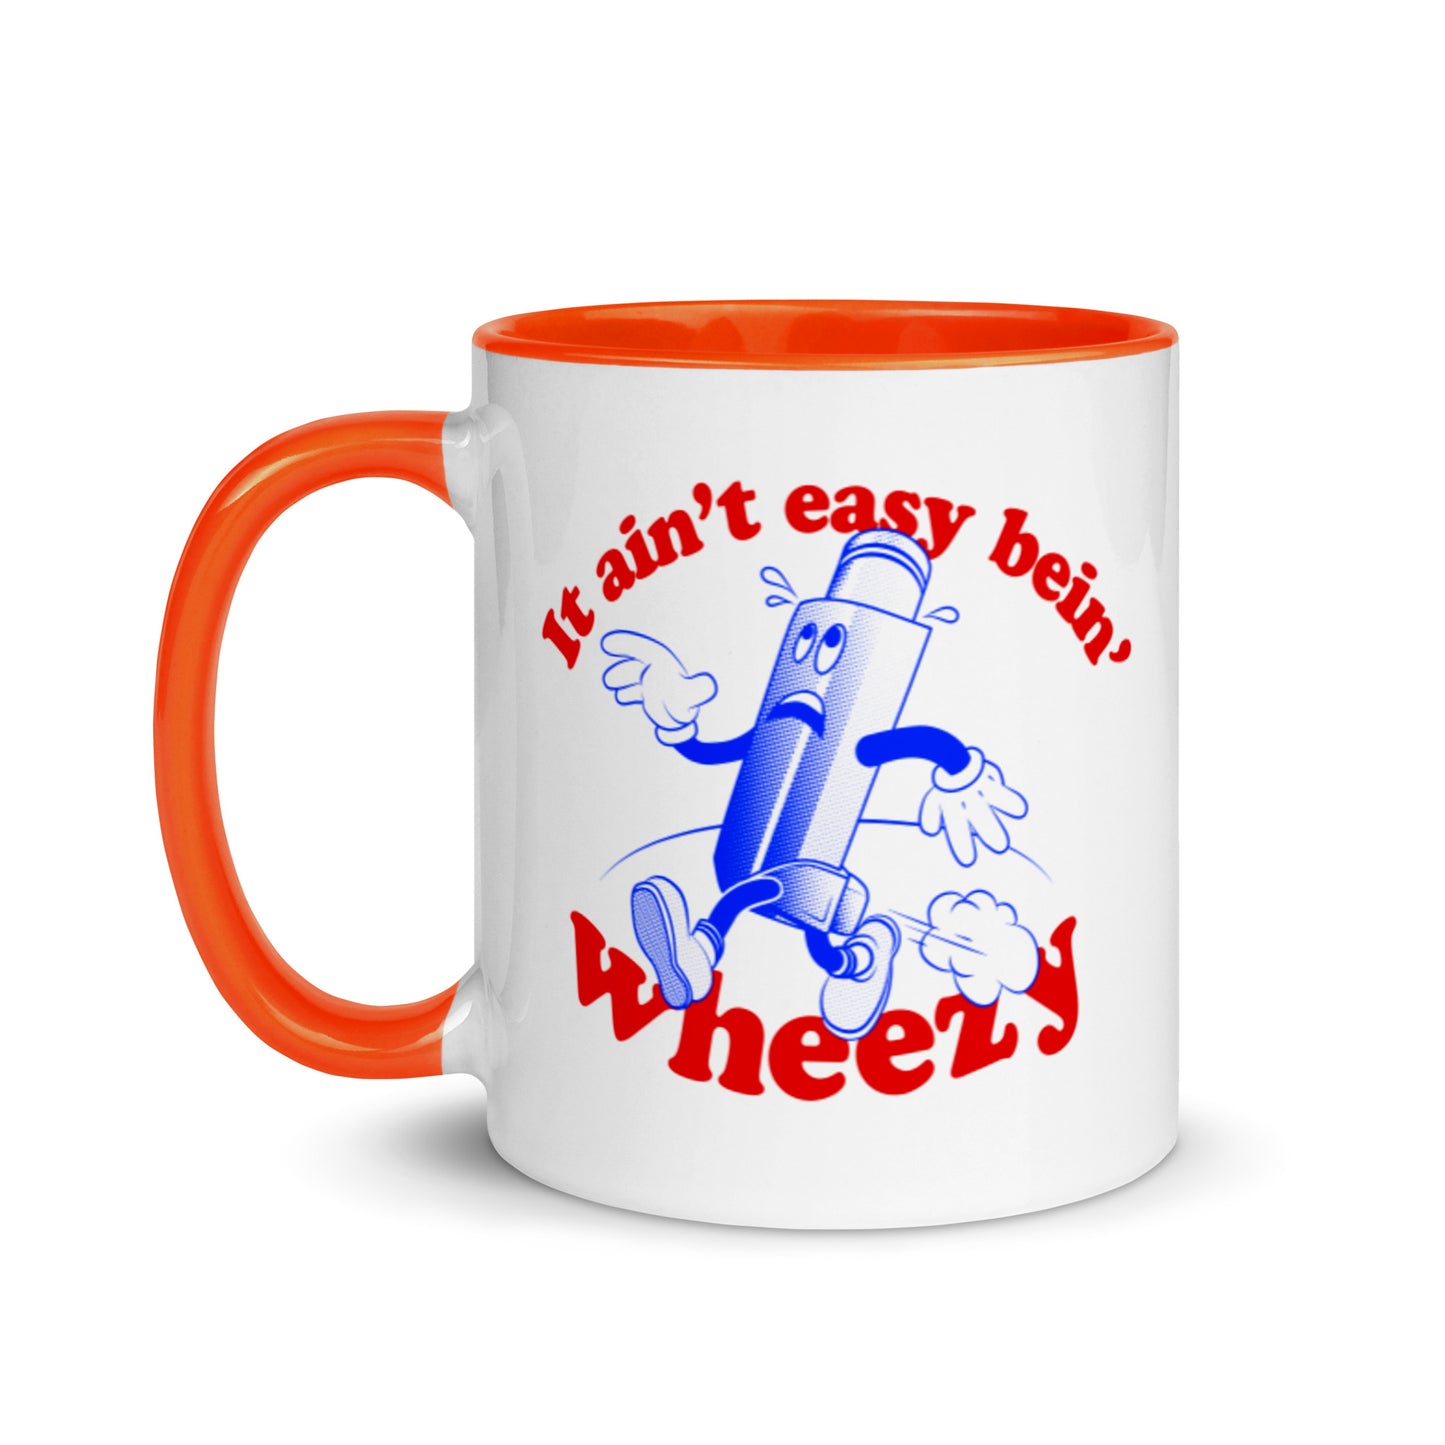 It ain't easy bein' wheezy - Mug with Color Inside